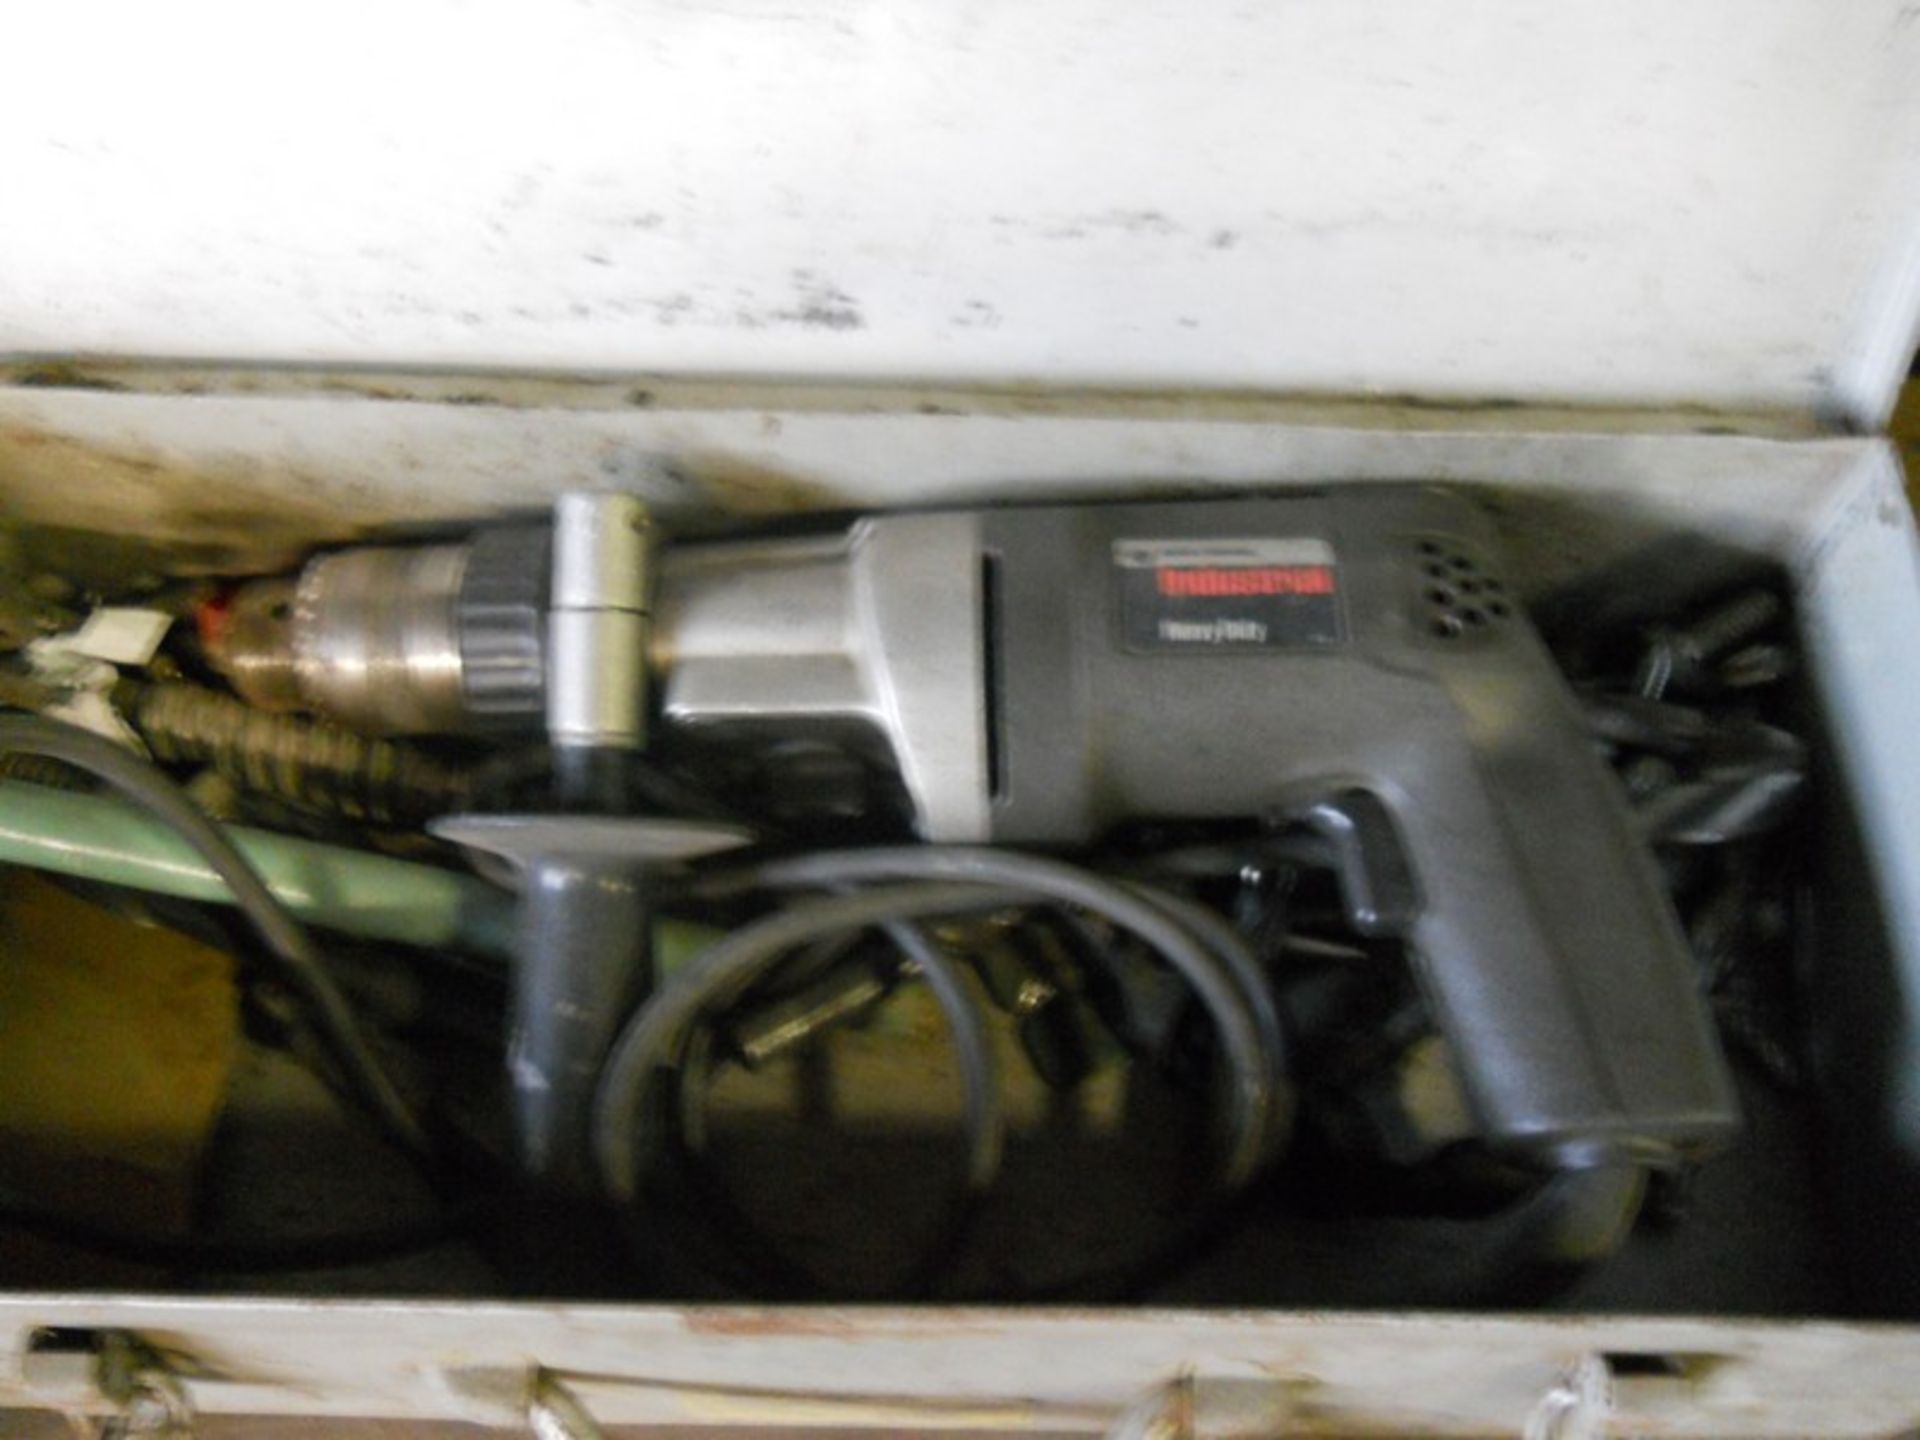 Industrial Electric Power Drill - Image 3 of 4